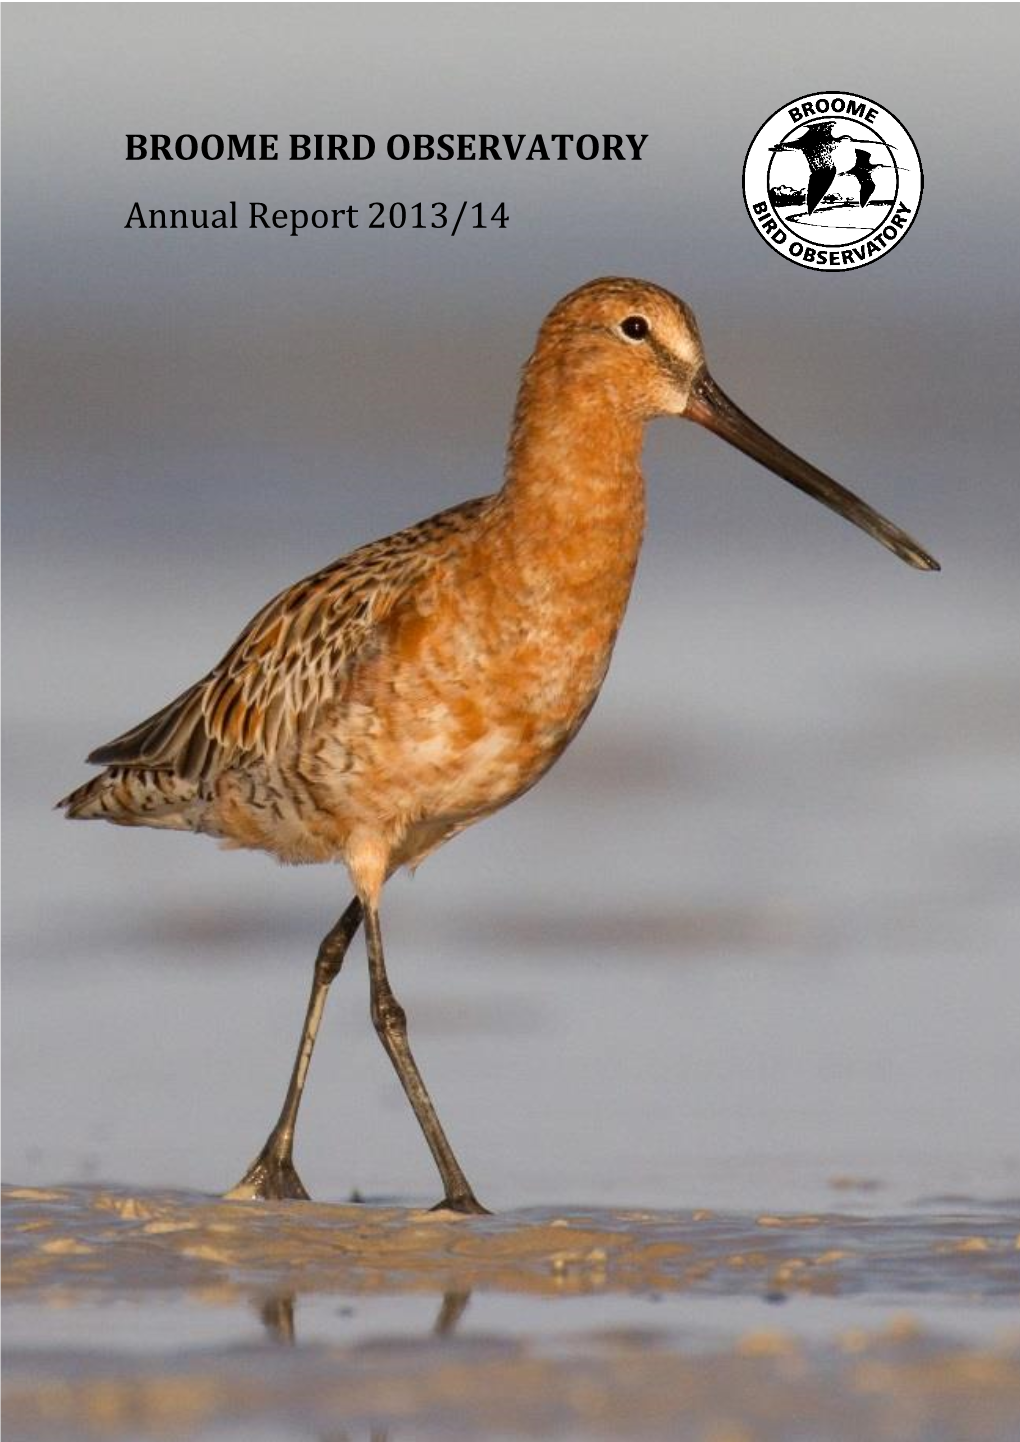 BROOME BIRD OBSERVATORY Annual Report 2013/14